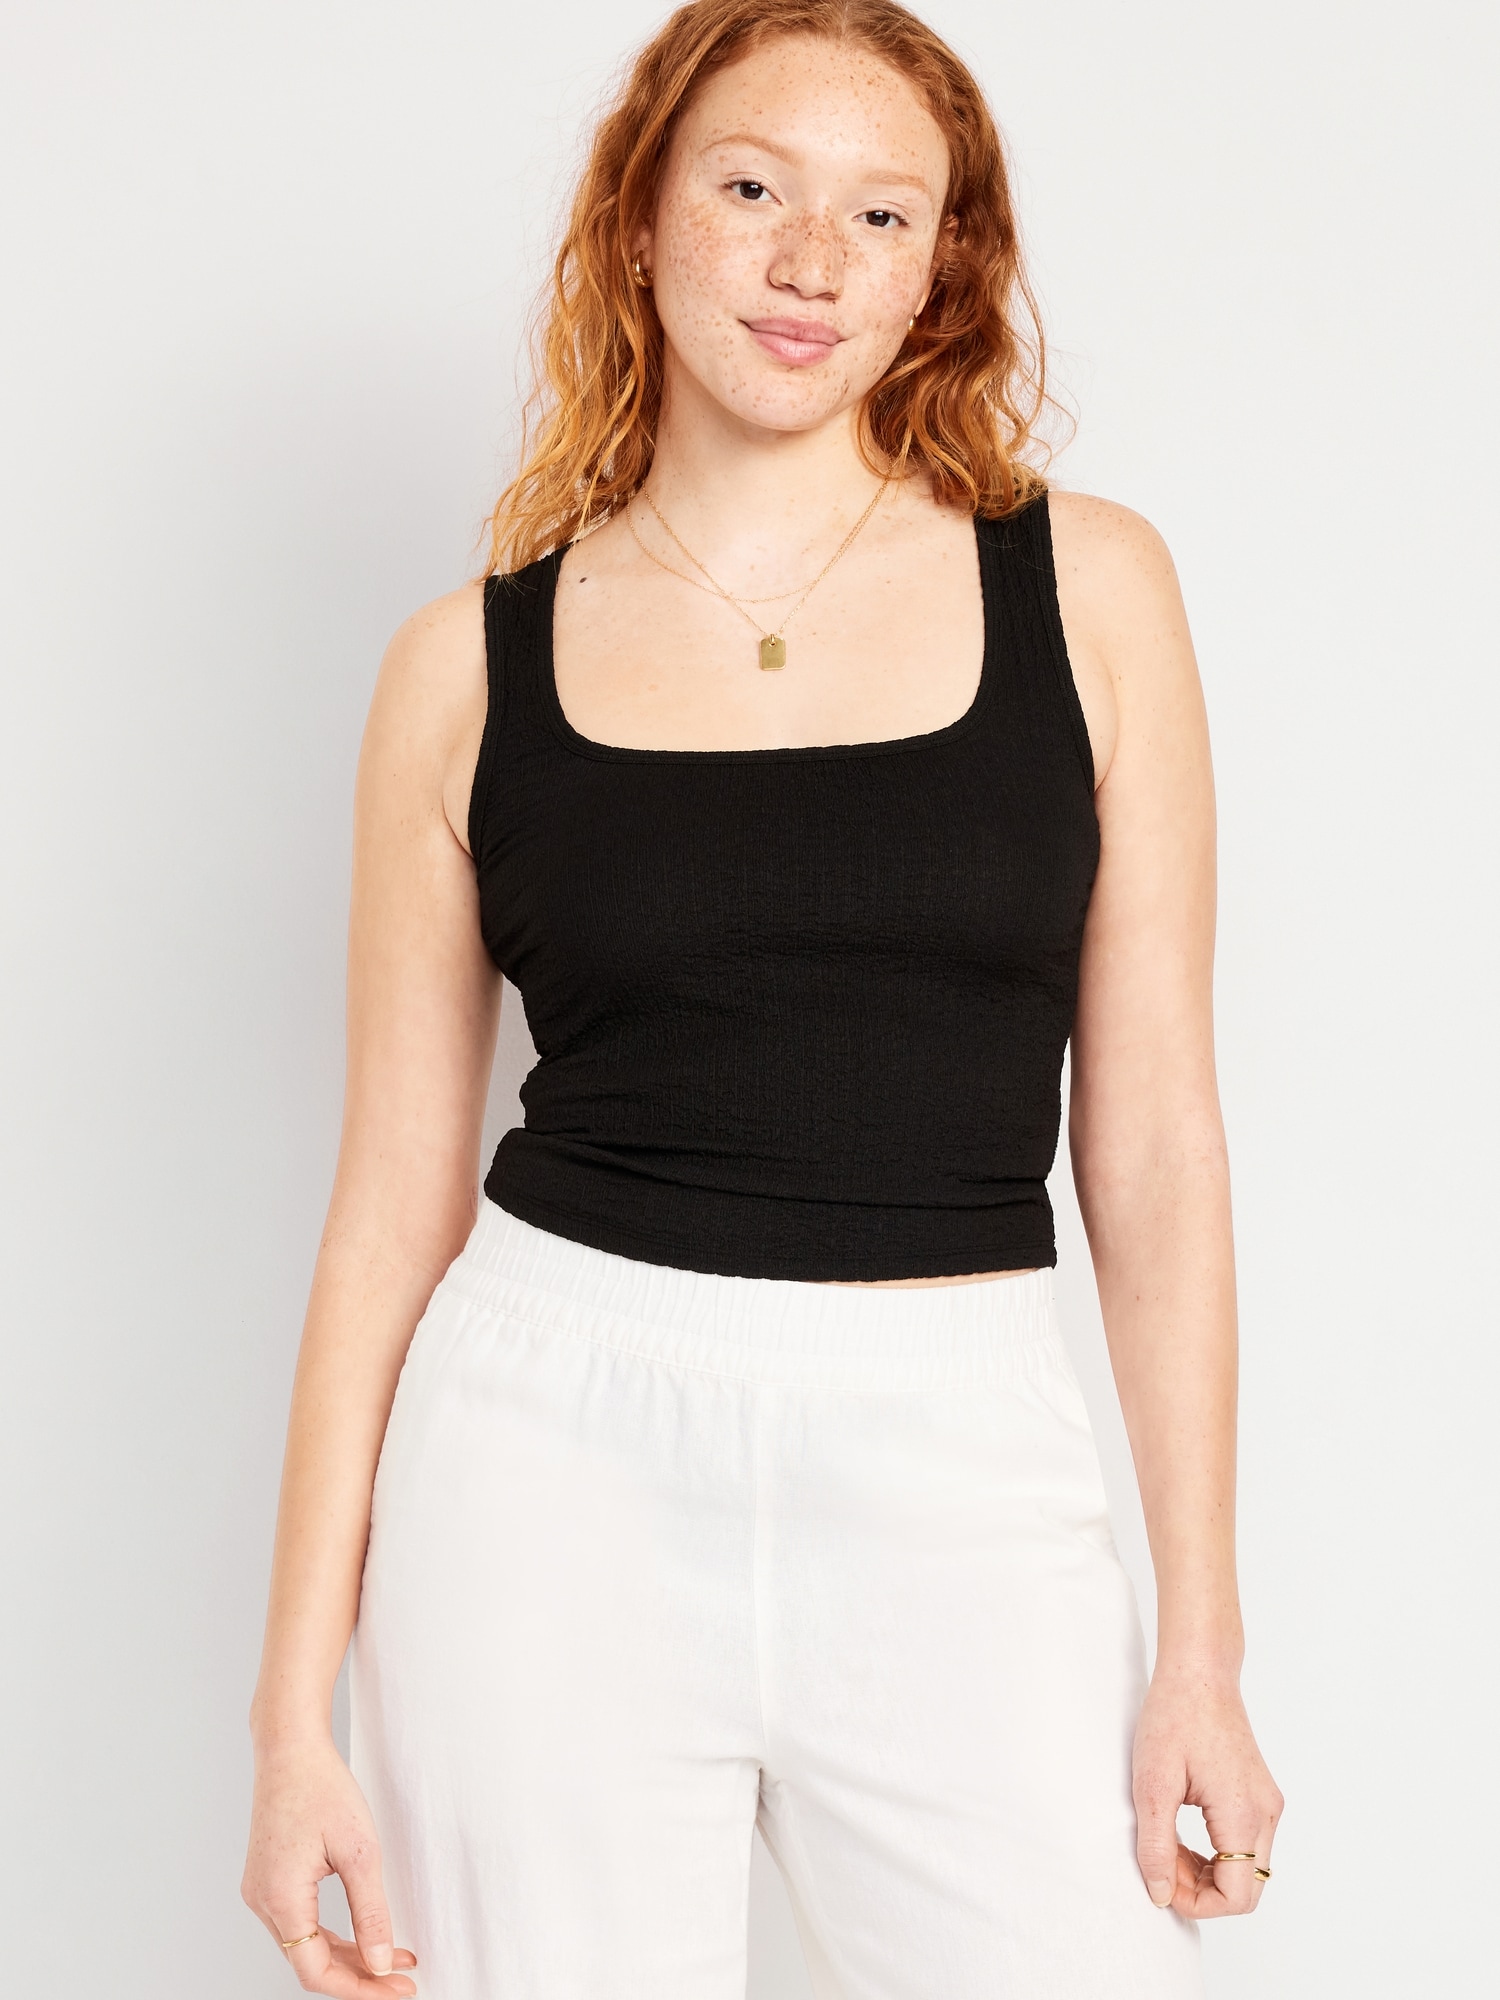 Square-Neck Textured Top Hot Deal